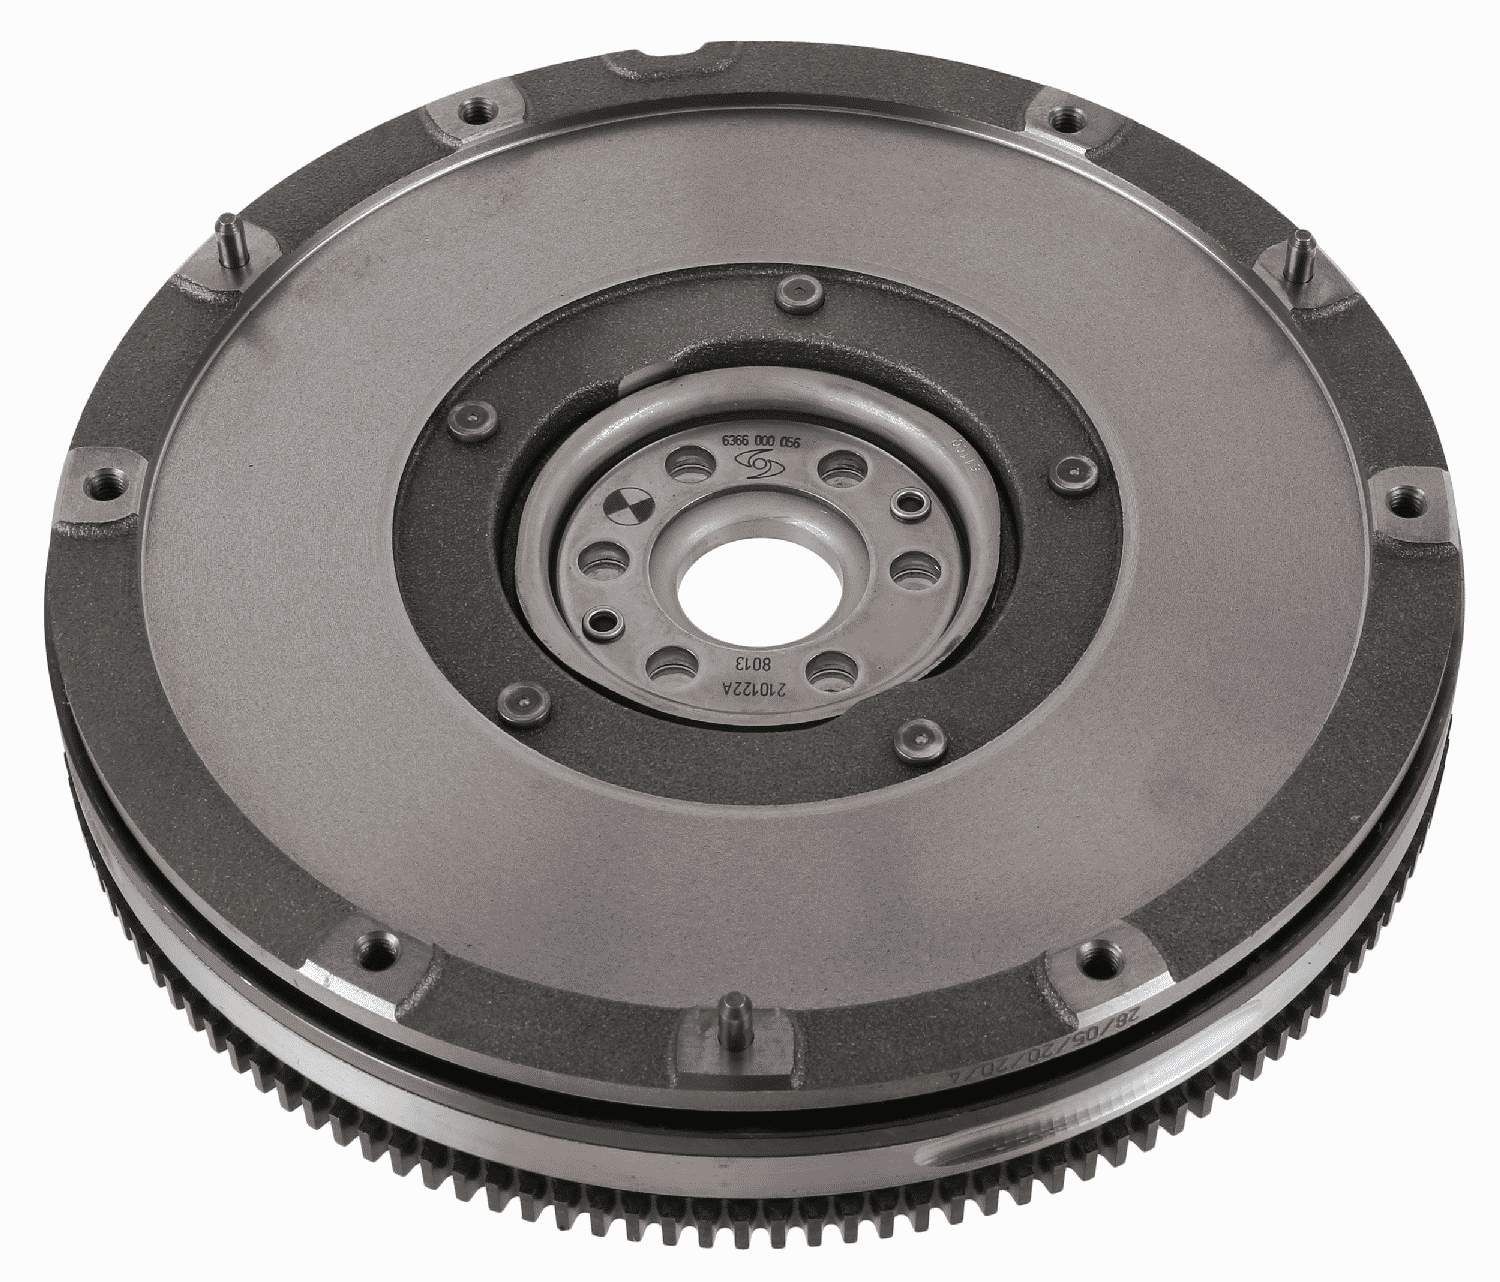 Dual flywheel clutch 6366 000 056 Ford FOCUS 2010 – buy replacement parts